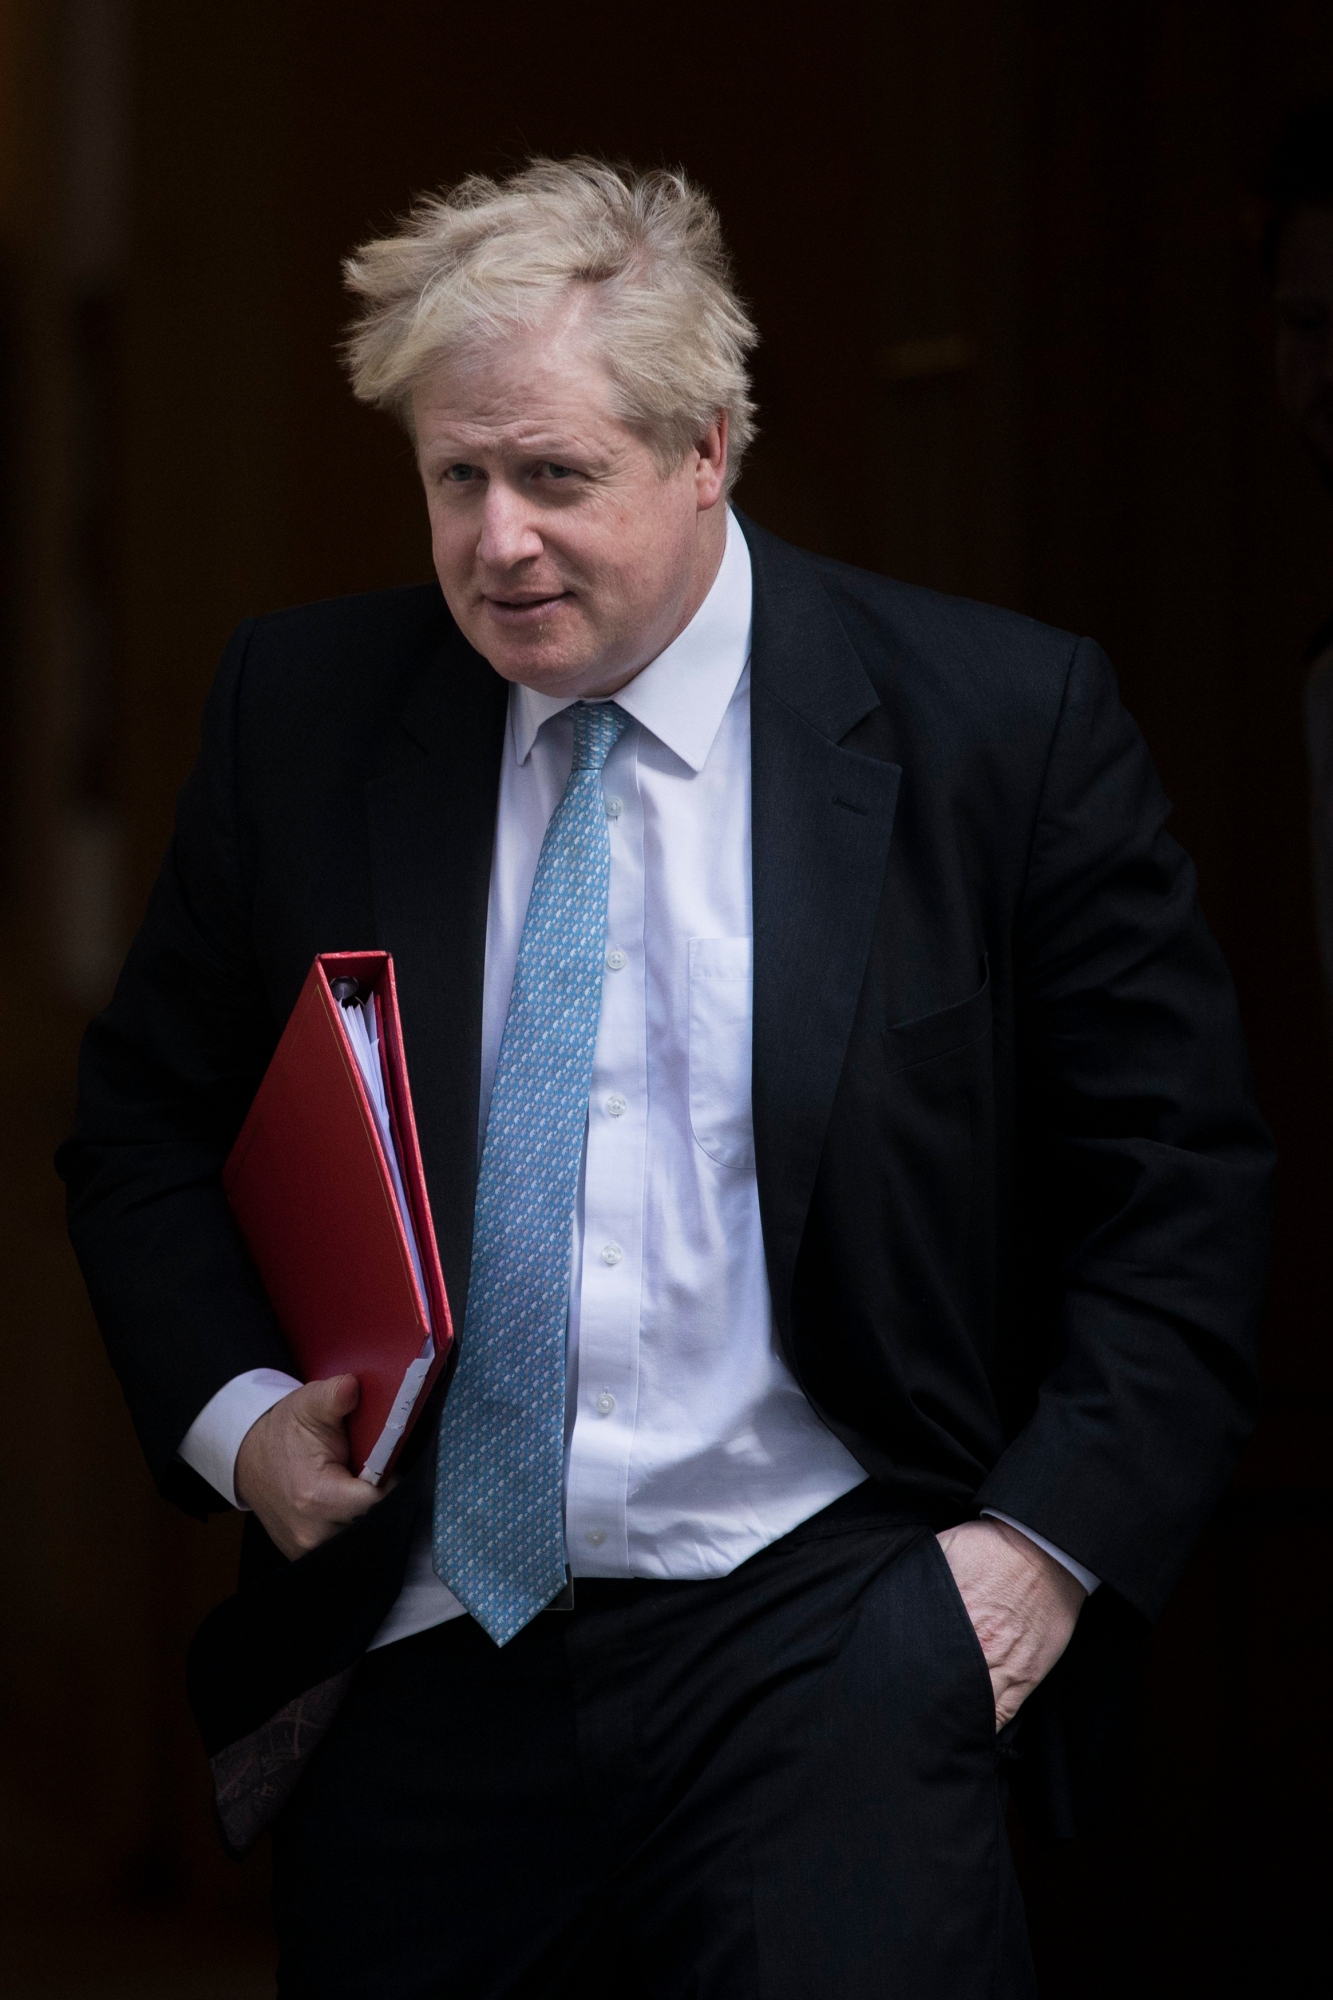 epa06500075 British Foreign Secretary Boris Johnson leaves after a cabinet meeting at 10 Downing Street in London, Britain, 06 February 2018.  EPA/WILL OLIVER BRITAIN POLITICS GOVERNMENT